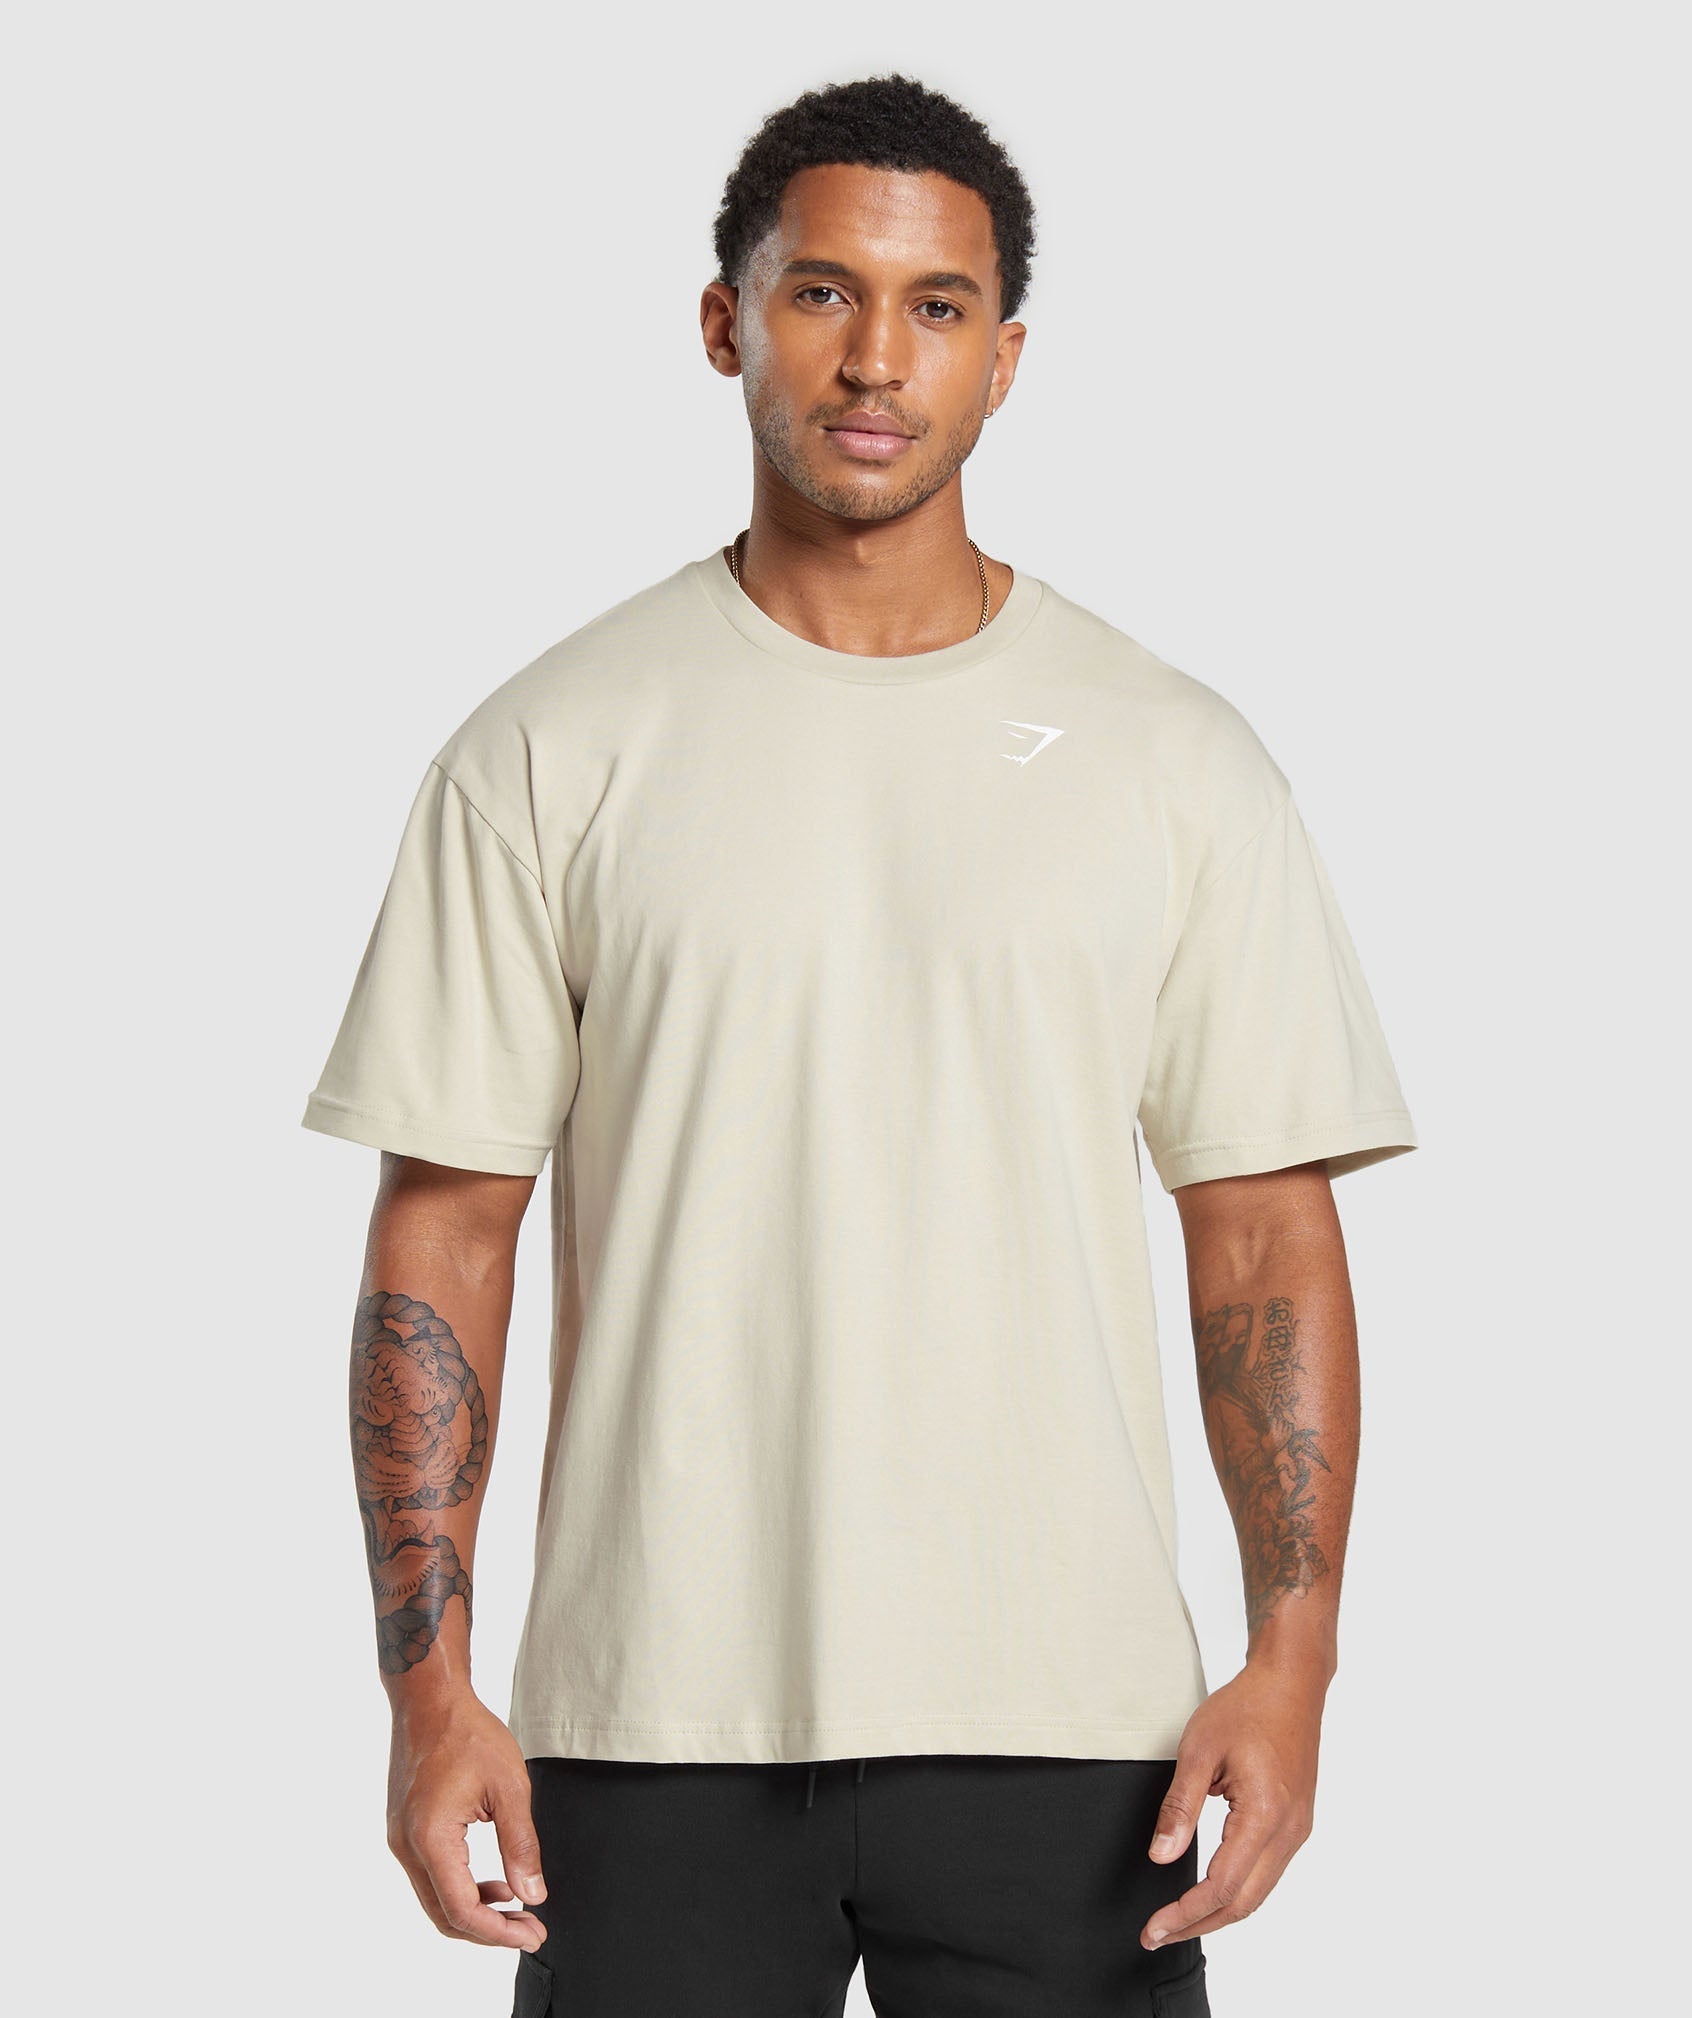 Essential Oversized T-Shirt in Pebble Grey is out of stock